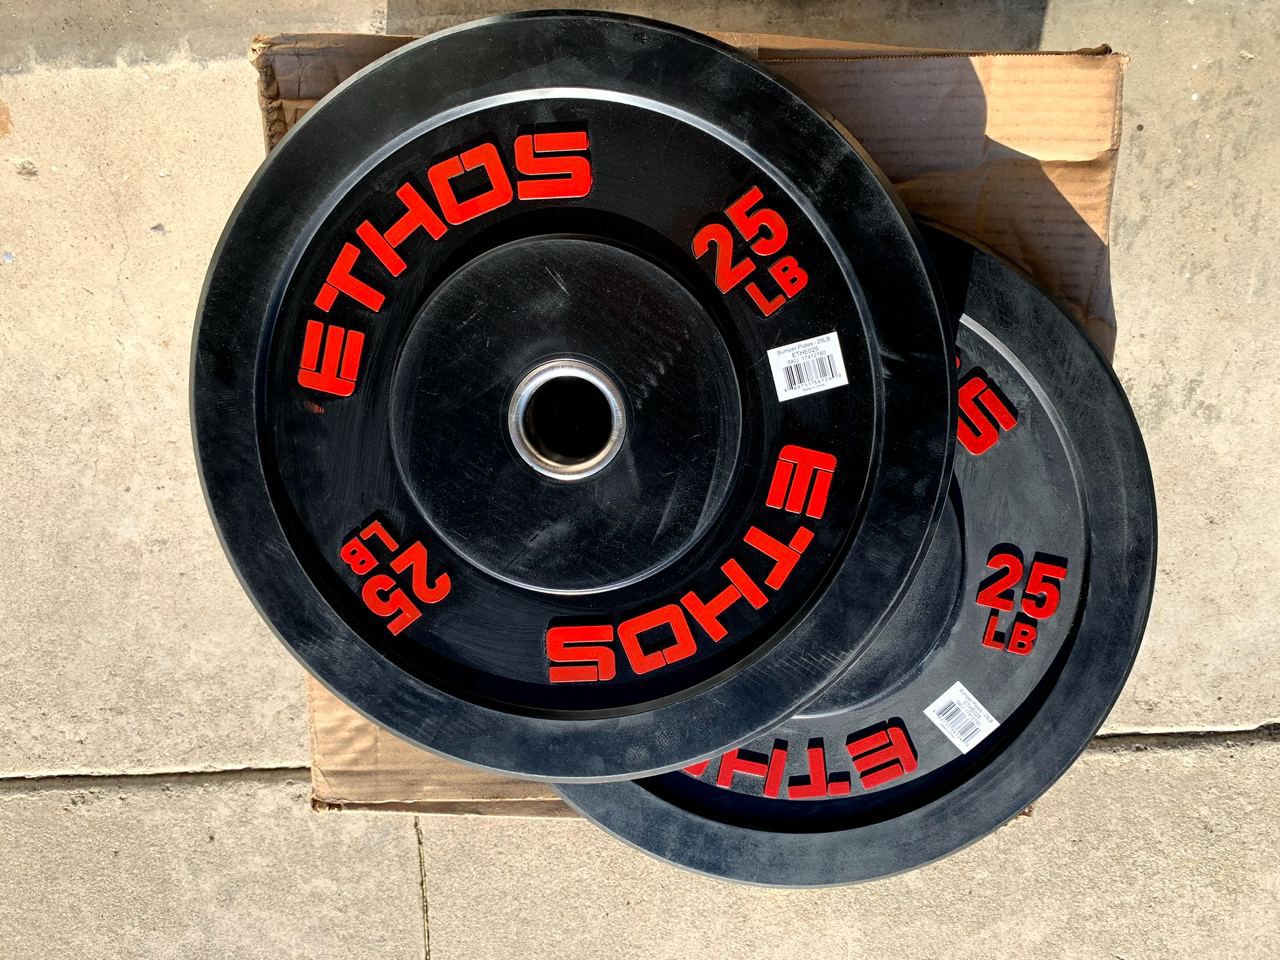 Ethos Bumper Plates Olympic Weights 25 lbs pair, 50 lbs total PRICE FIRM